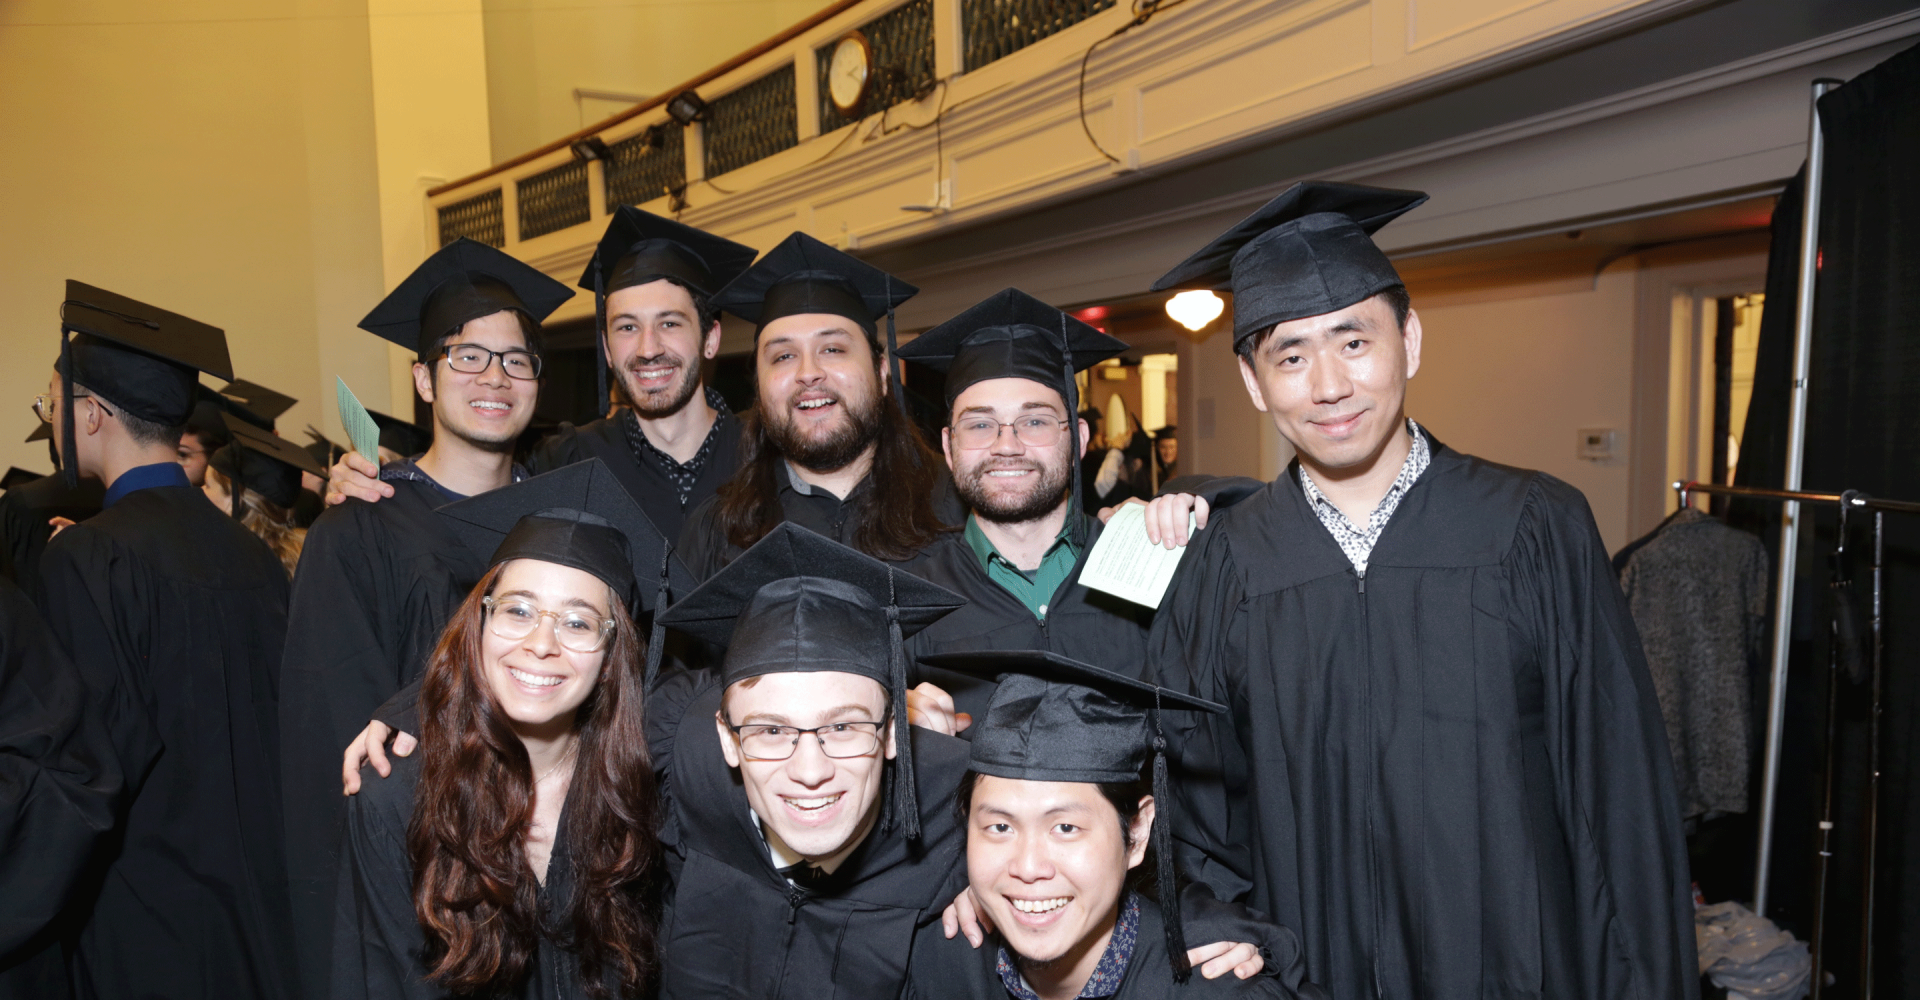 Eight smiling graduates wearing caps and gowns